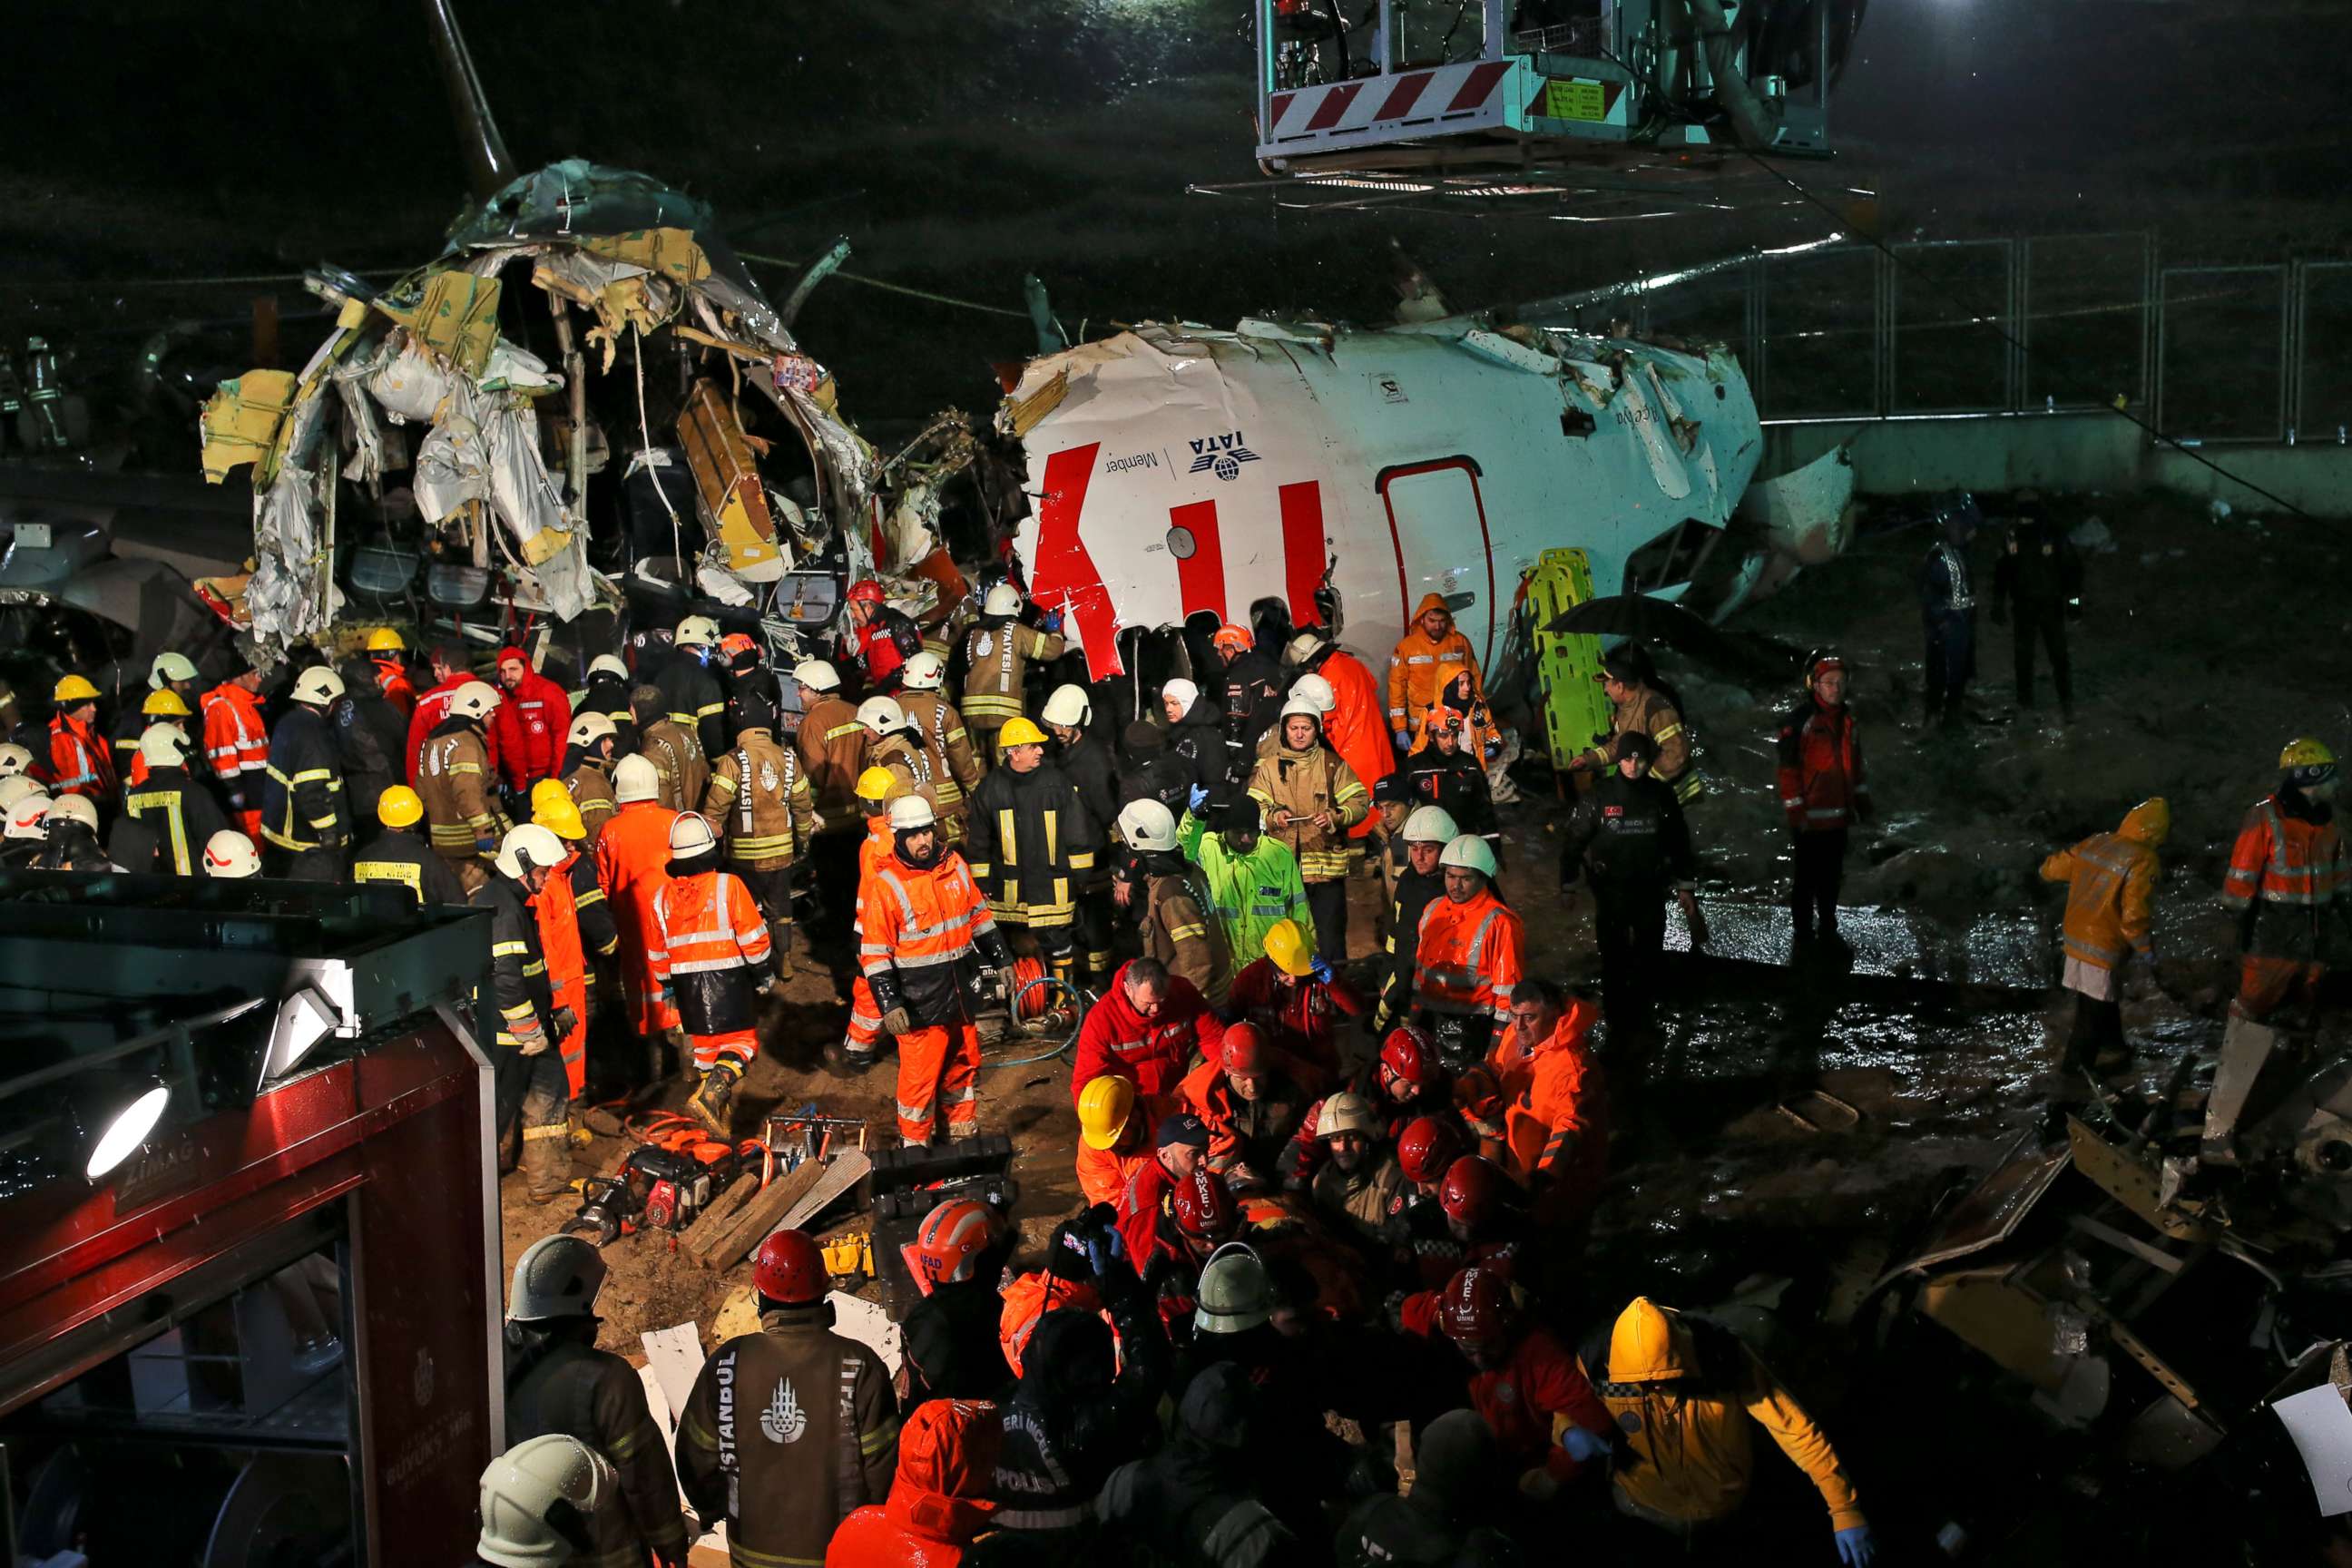 PHOTO: Rescue members evacuate an injured person from the wreckage of a plane after it skidded off the runway at Istanbul's Sabiha Gokcen Airport, in Istanbul, Wednesday, Feb. 5, 2020.